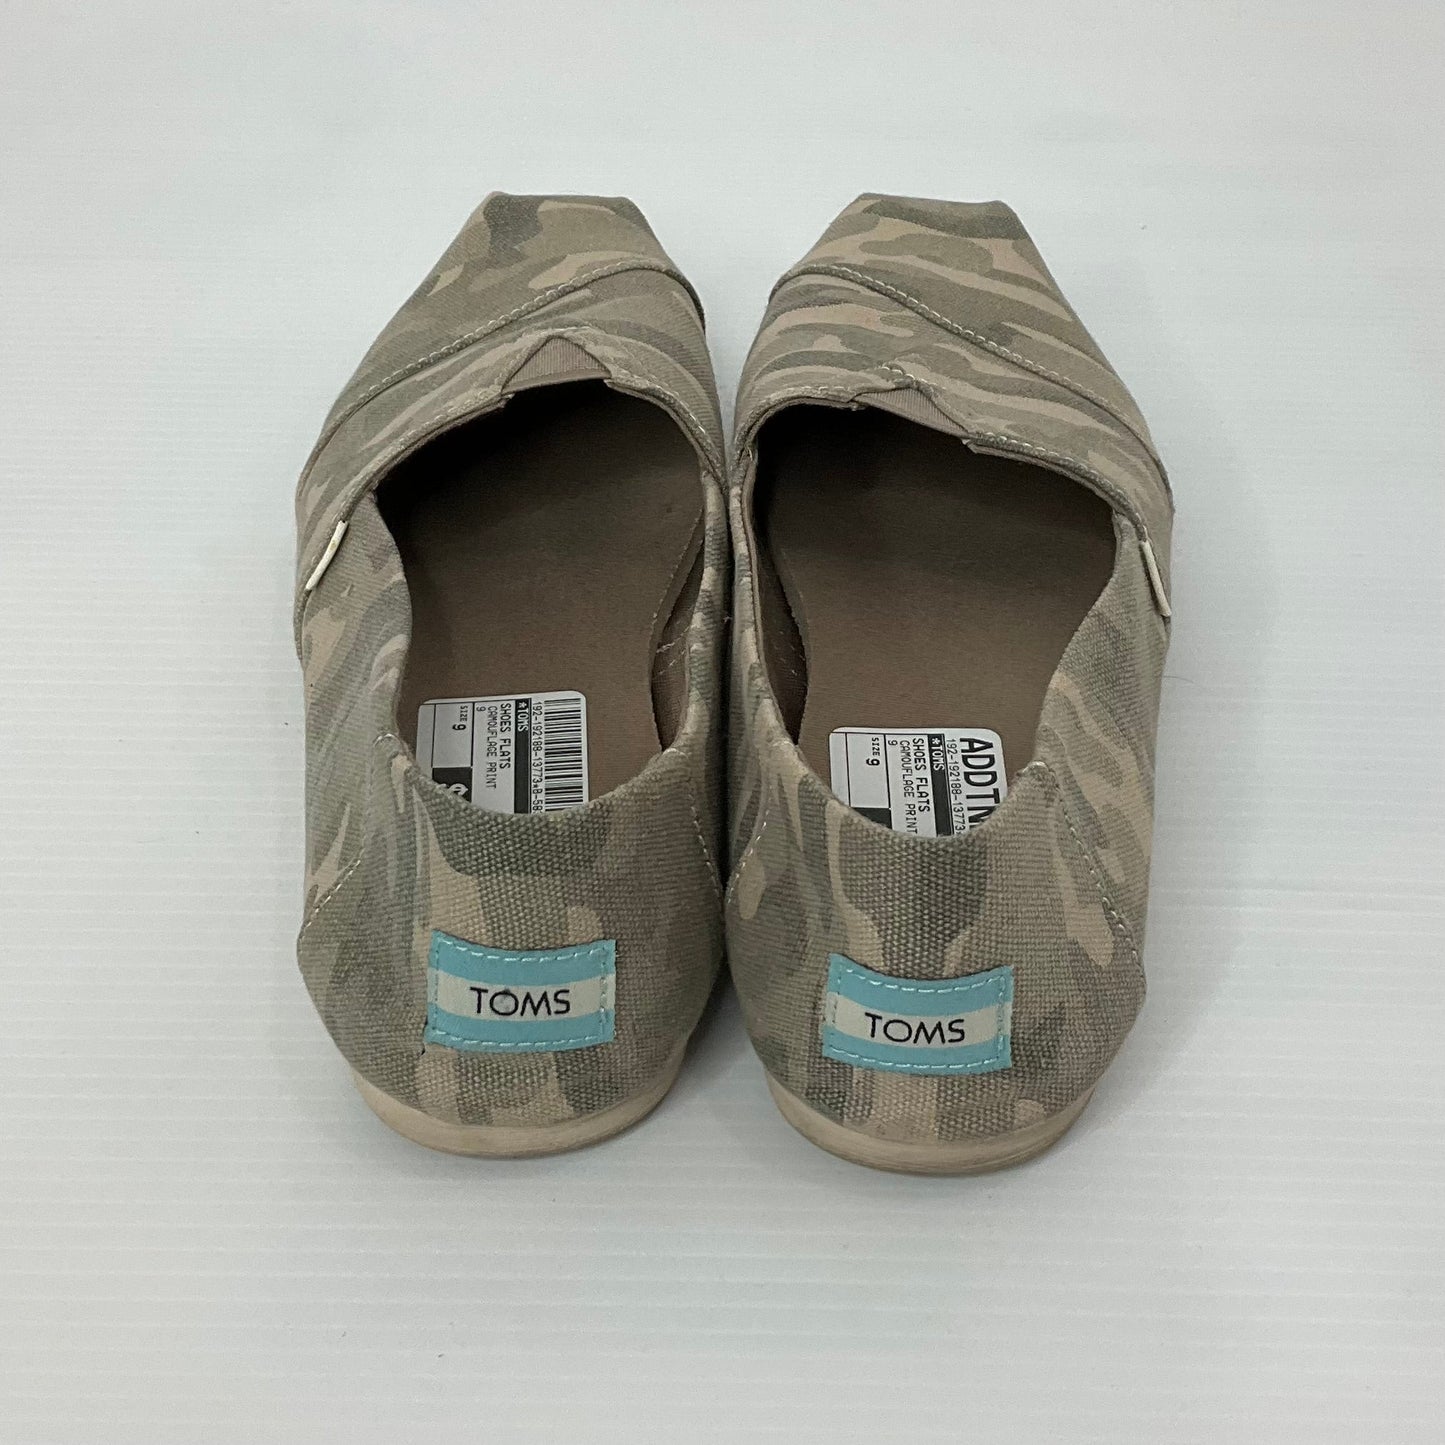 Camouflage Print Shoes Flats Toms, Size 9